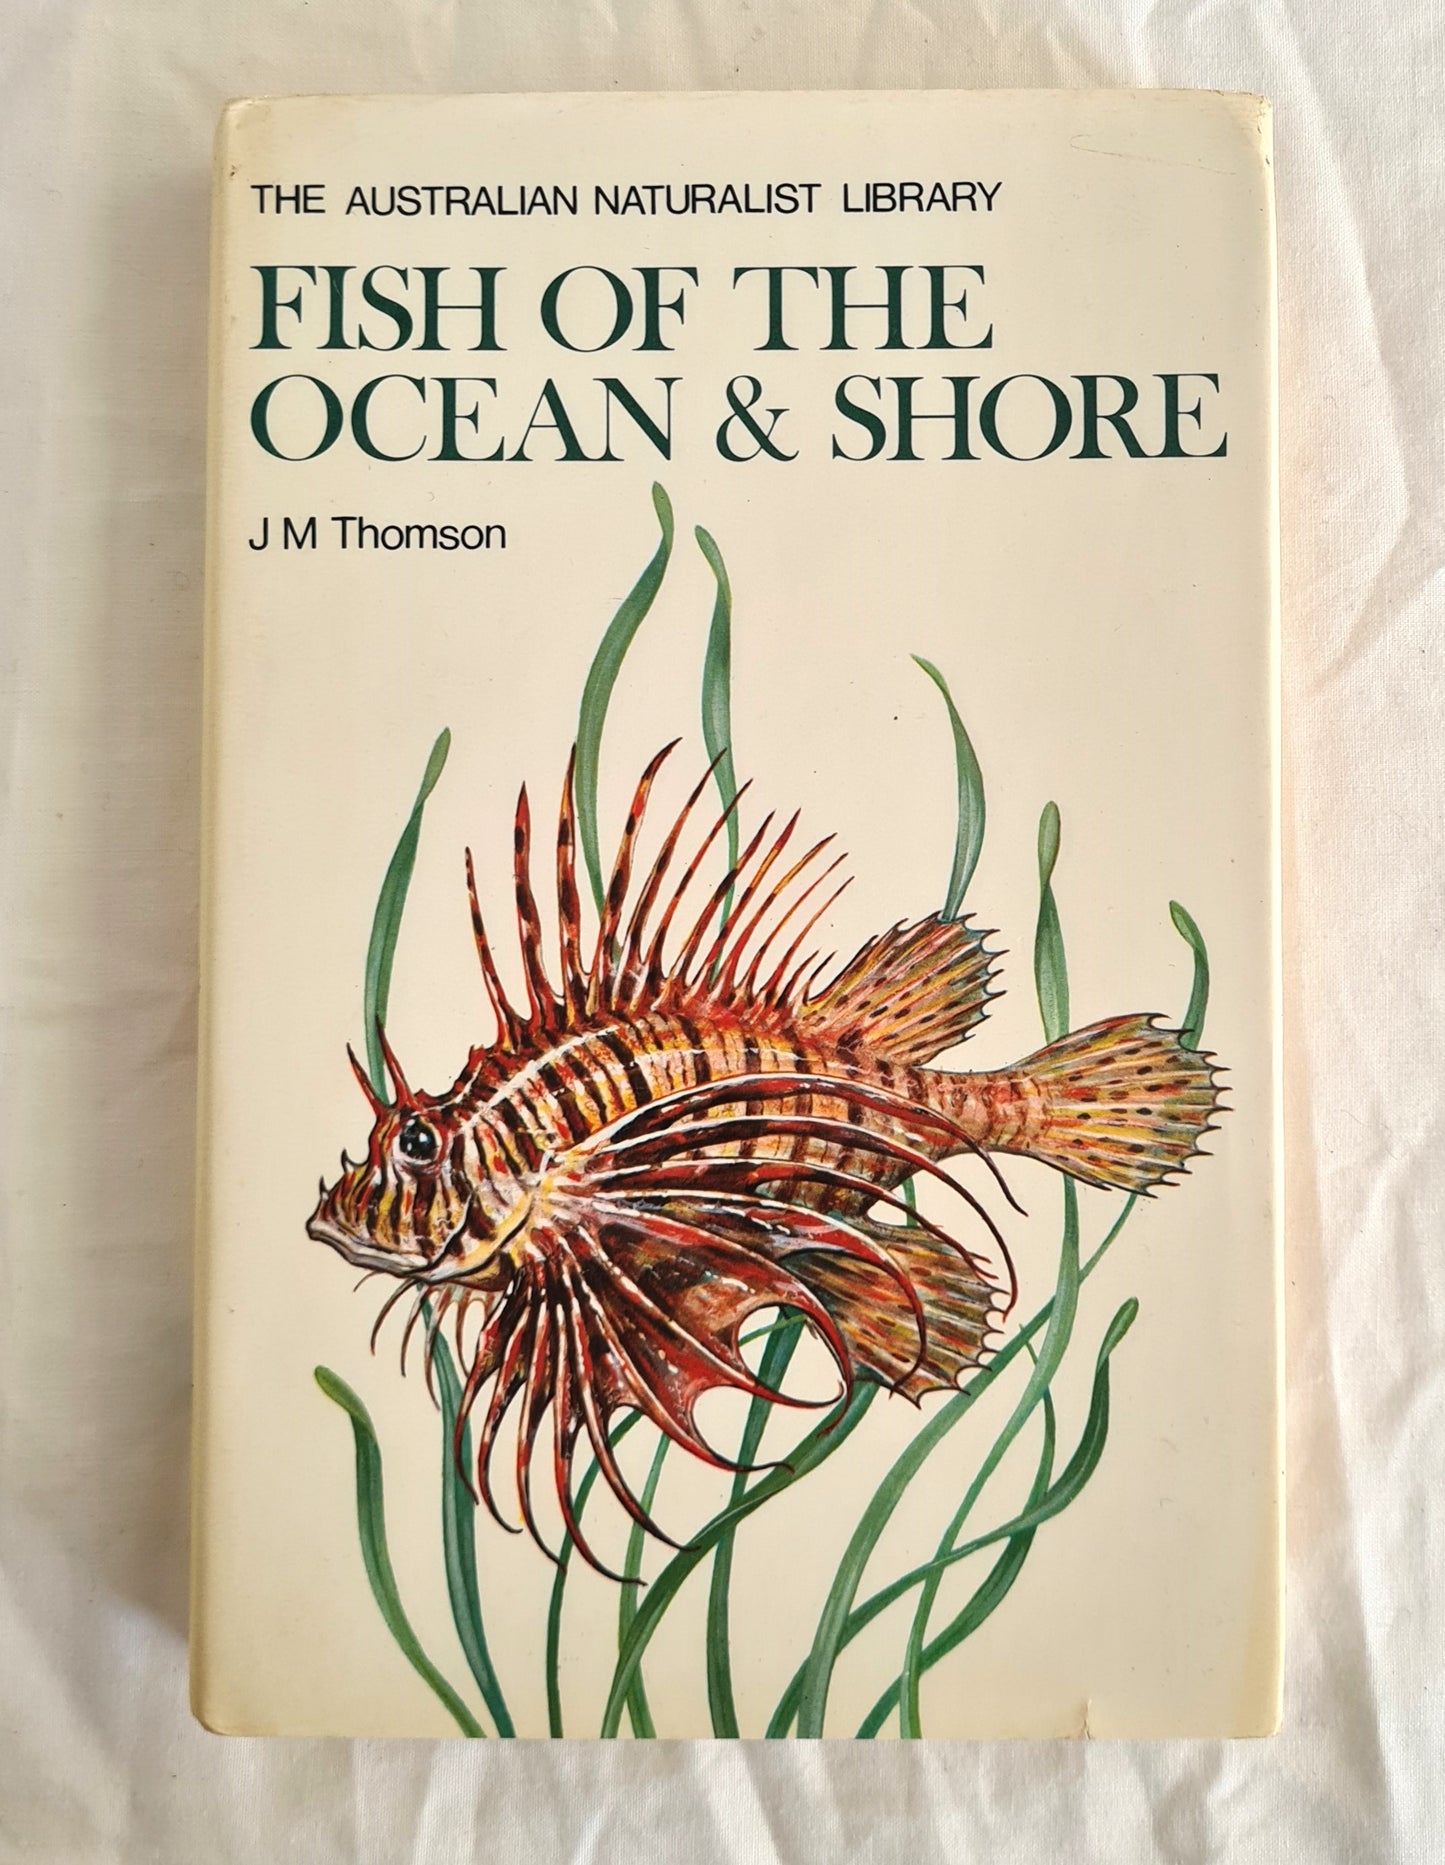 Fish of the Ocean and Shore  The Australian Naturalist Library  by J. M. Thomson